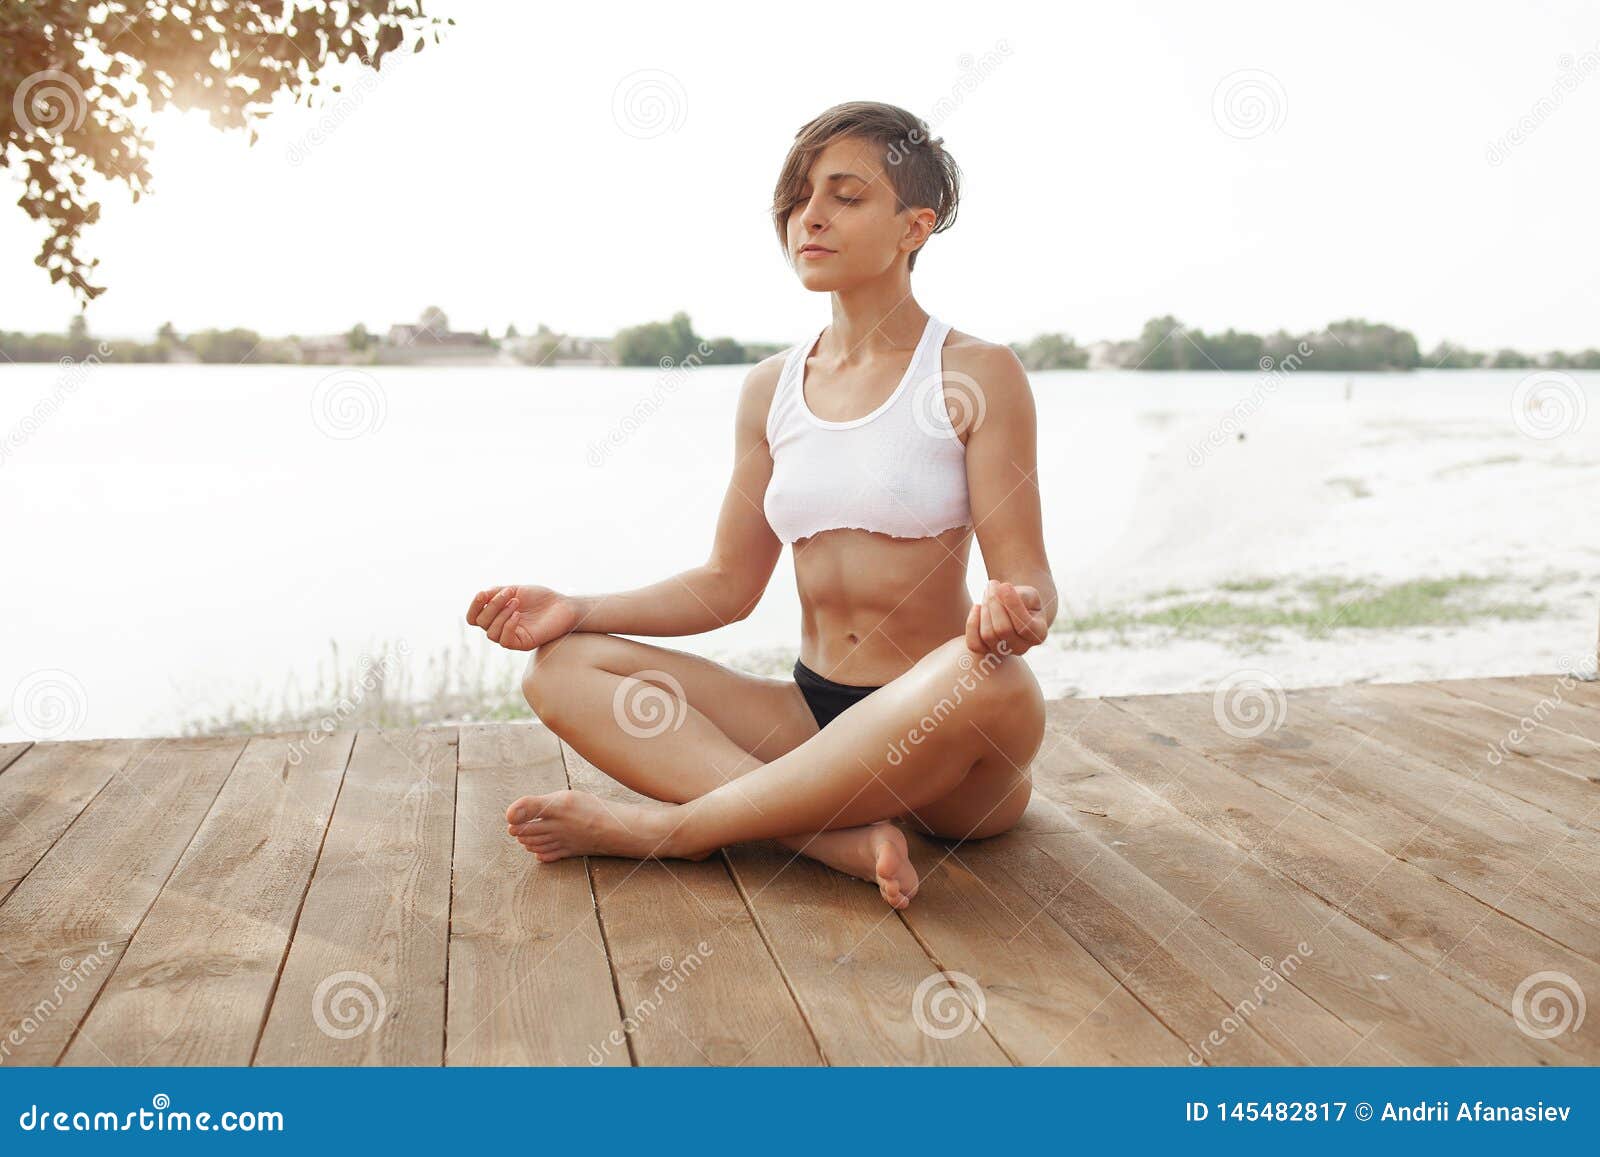 Summer. a Beautiful Girl with a Short Haircut Practices Yoga in the Lotus  Position Stock Image - Image of lifestyle, nature: 145482817